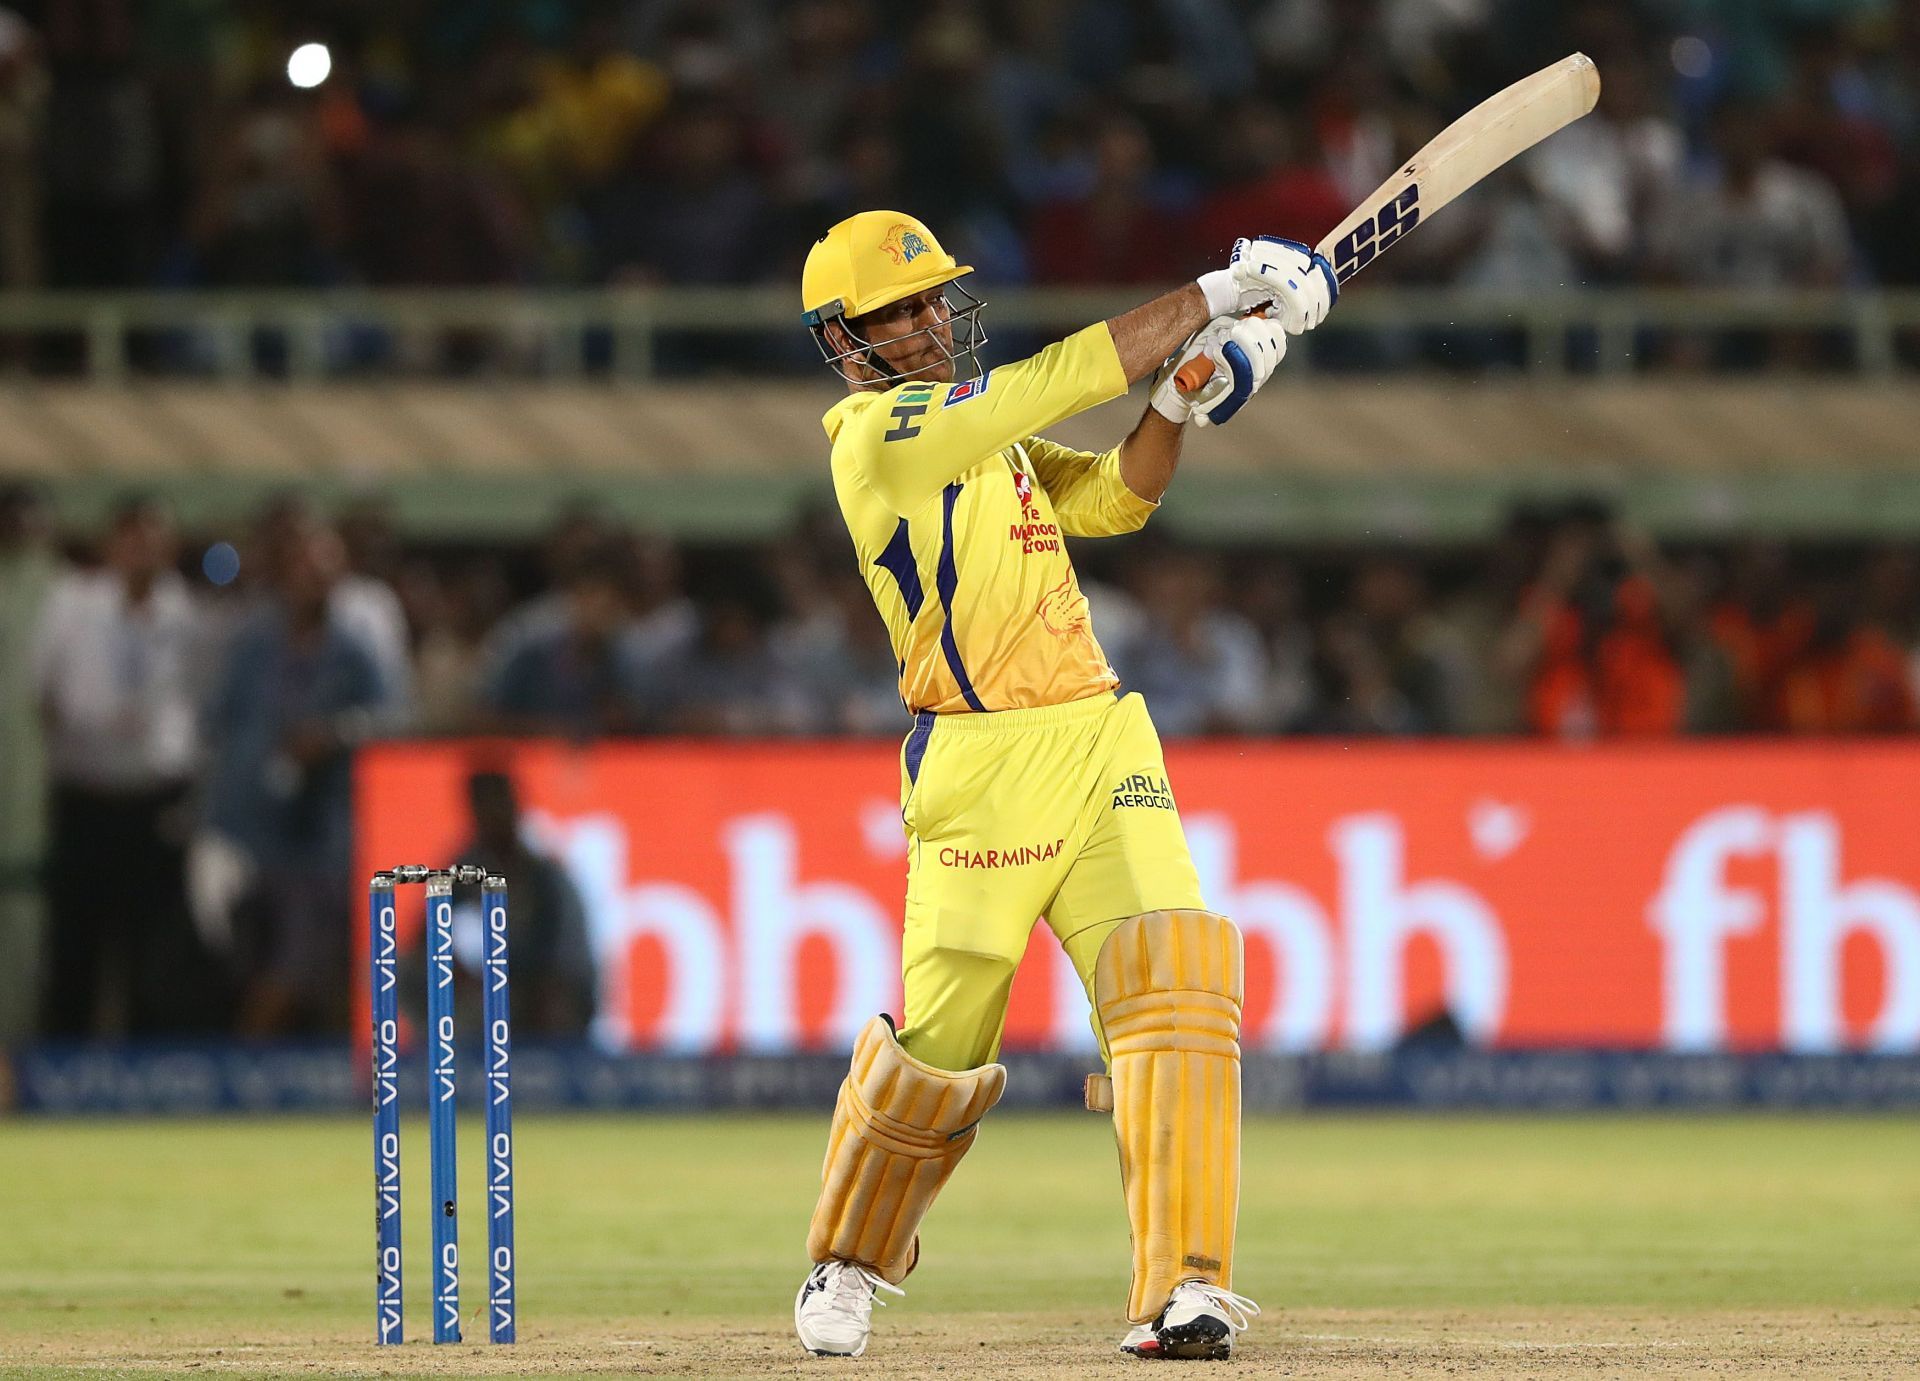 CSK skipper MS Dhoni. Pic: Getty Images